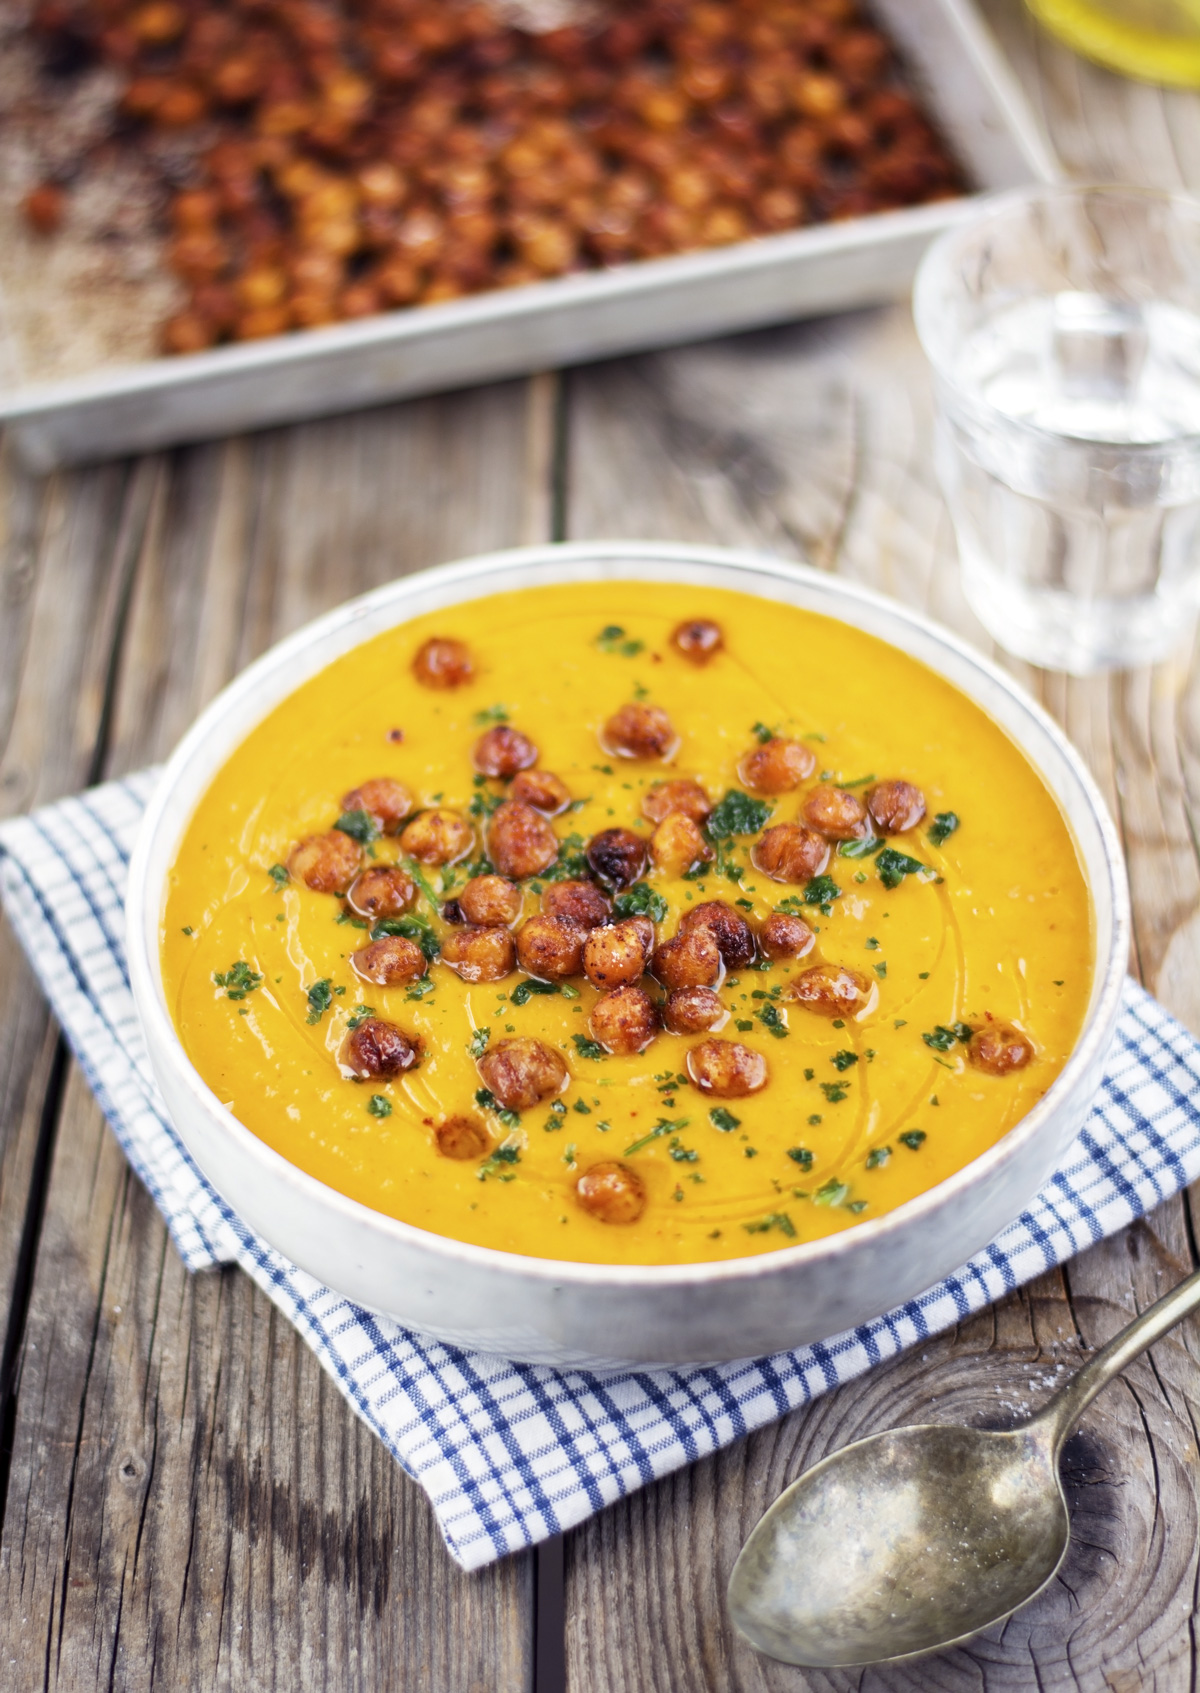 (Vegan) Roasted Butternut Squash and Pear Soup with Paprika Chickpeas